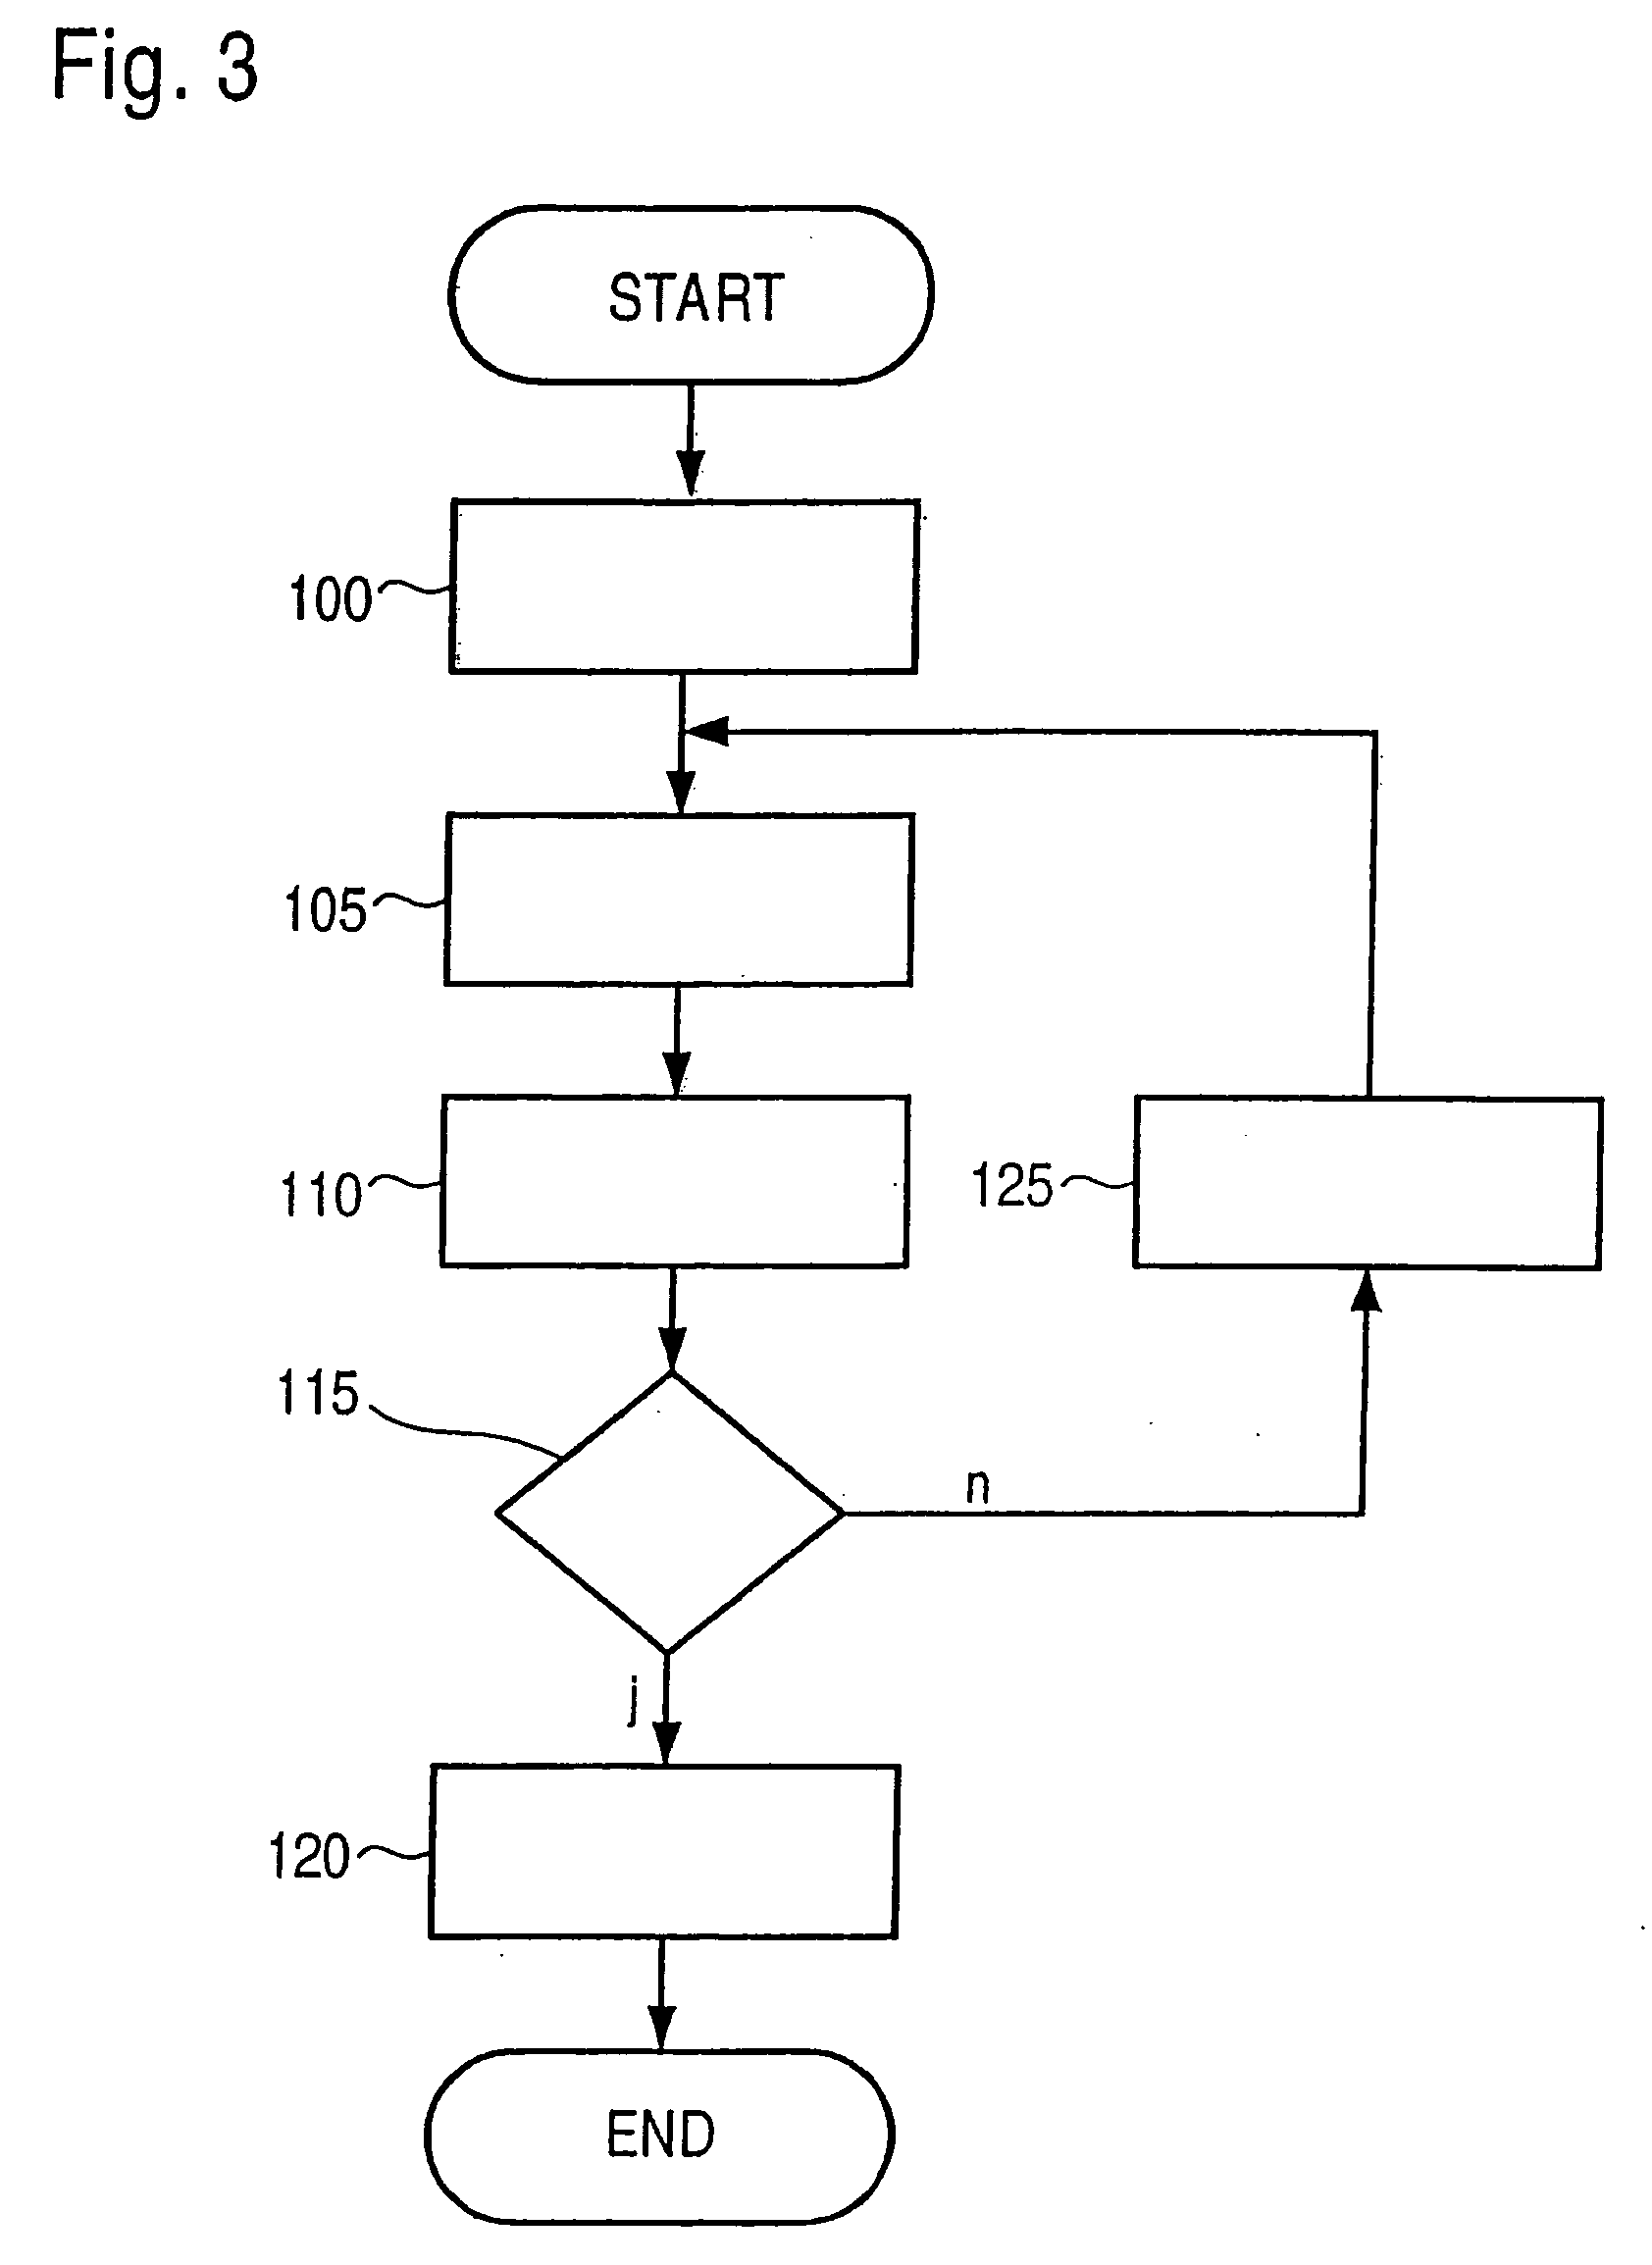 Method for Operating an Internal Combustion Engine having a plurality of cylinder banks